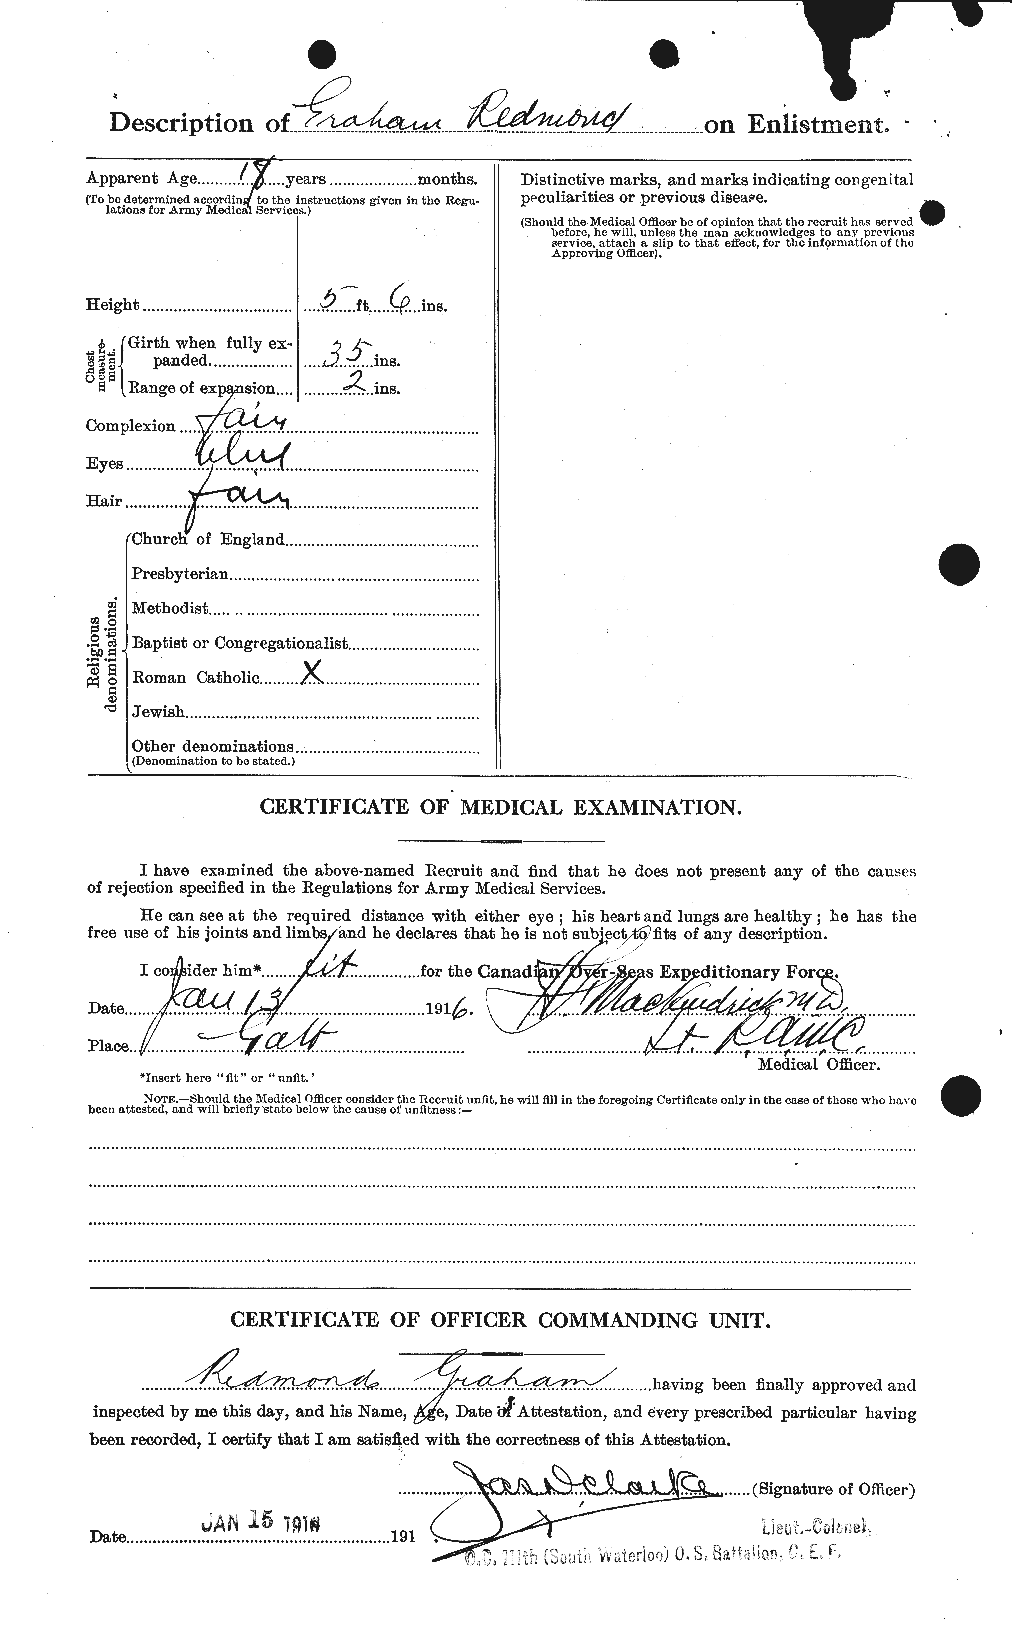 Personnel Records of the First World War - CEF 359361b